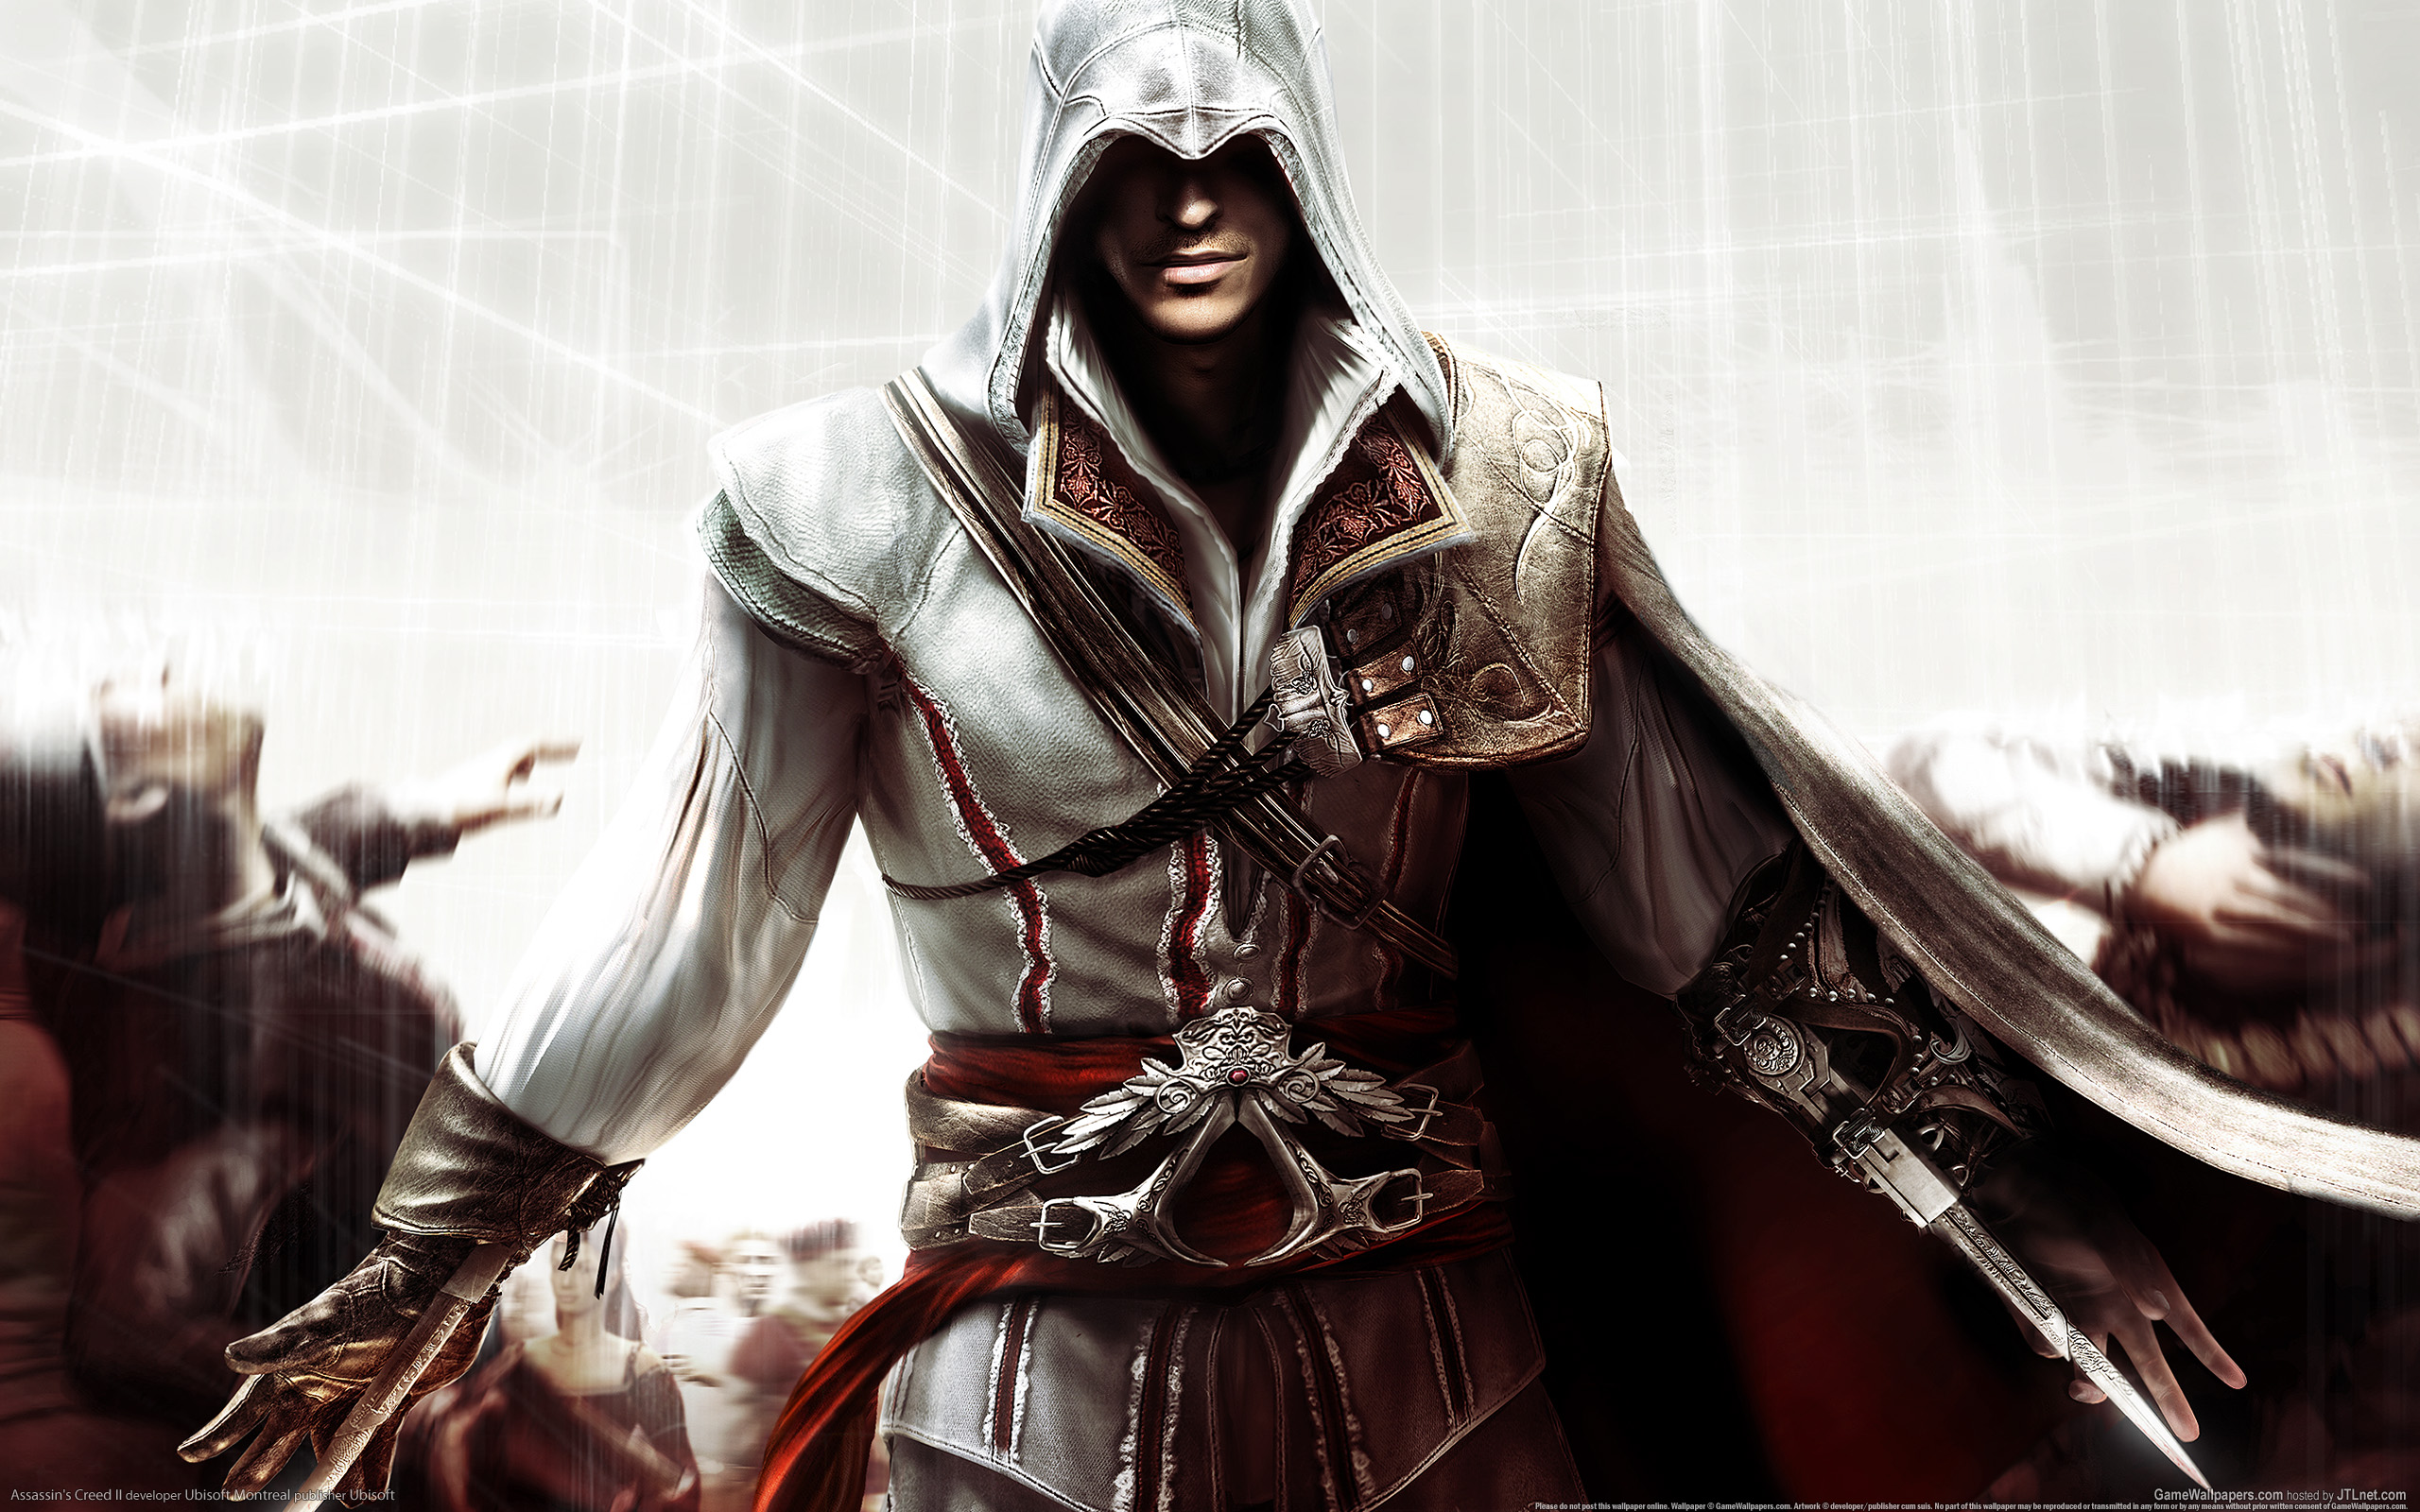 Assassin games 2. Ассасин Крид 2. Ассасин Крид 2 Эцио Аудиторе. Assassin s Creed 2 Ezio Auditore. Assassin's Creed 2 обои 1920x1080.